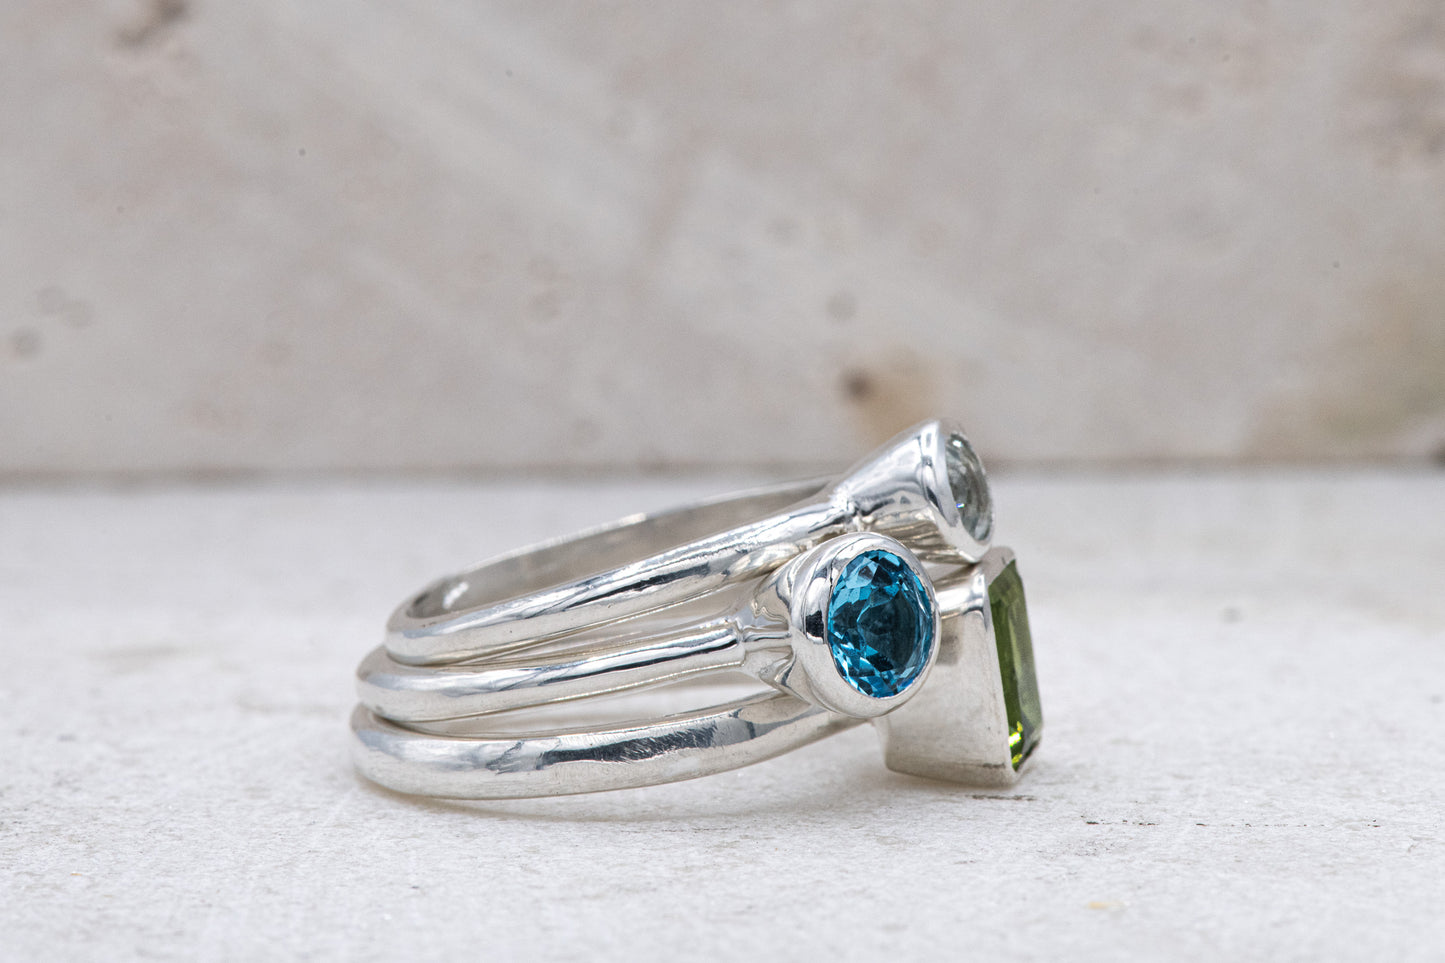 A Peridot and Swiss Blue Topaz Gemstones Stacking Rings in Sterling Silver, handmade by Cassin Jewelry.